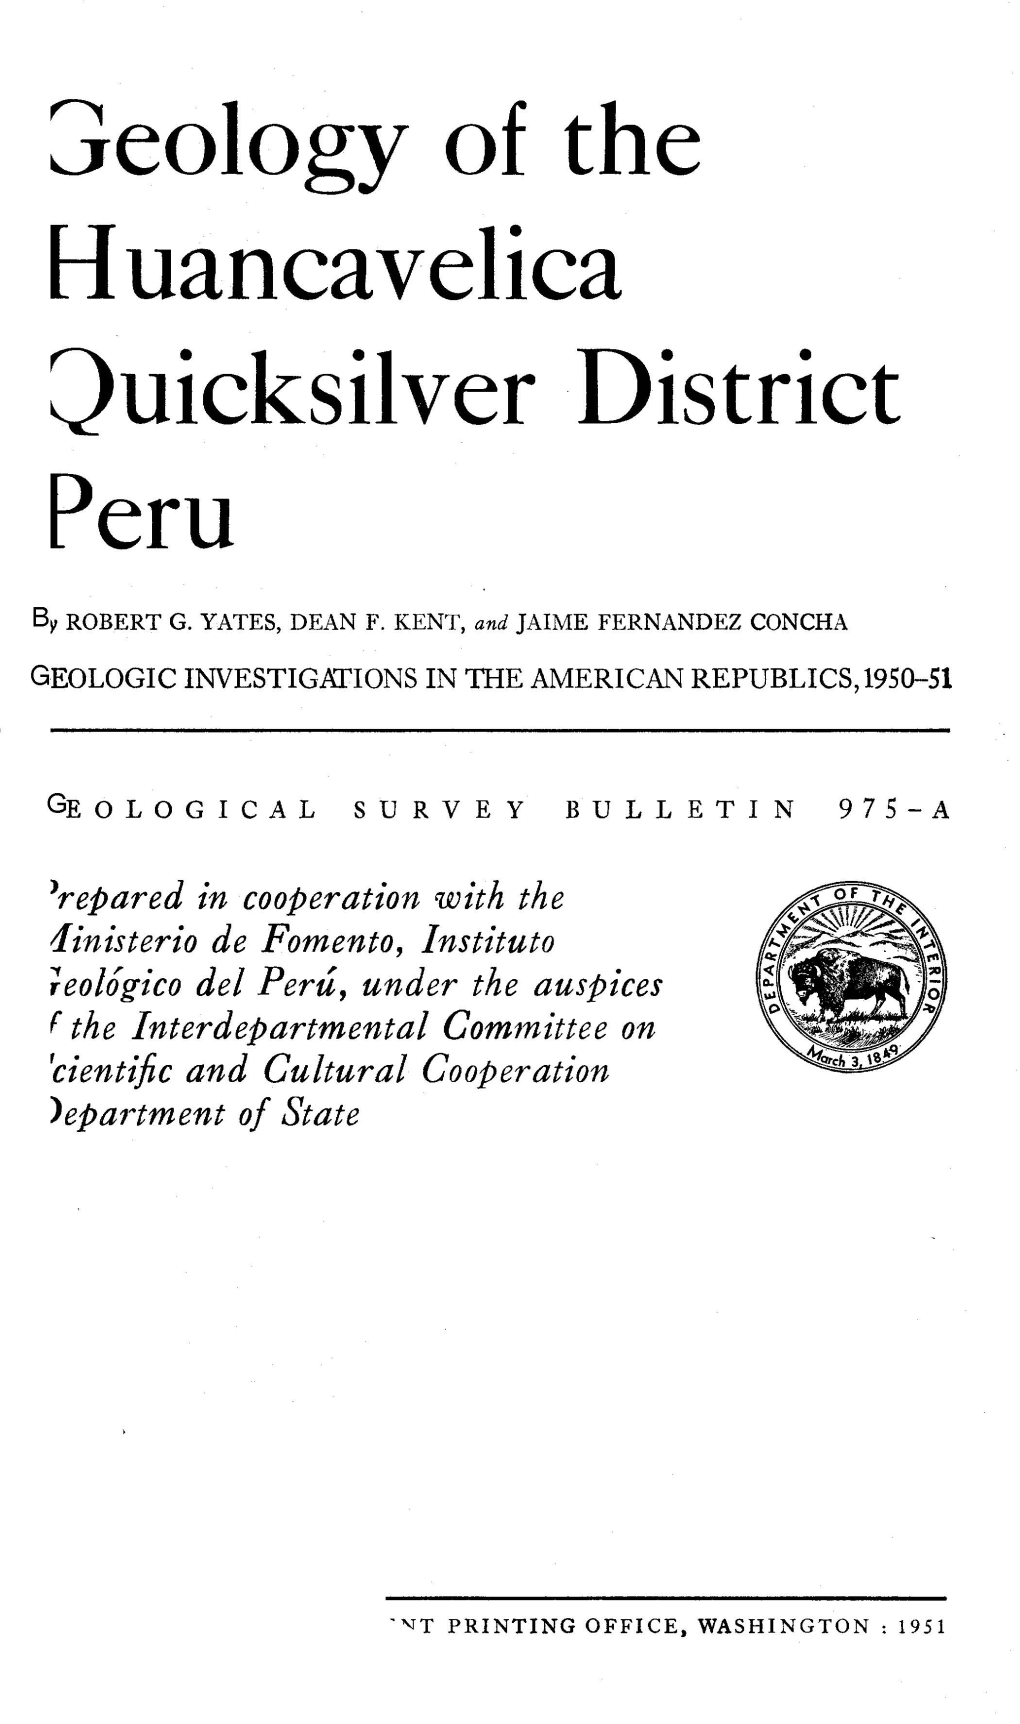 Geology of the Huancavelica Quicksilver District, Peru